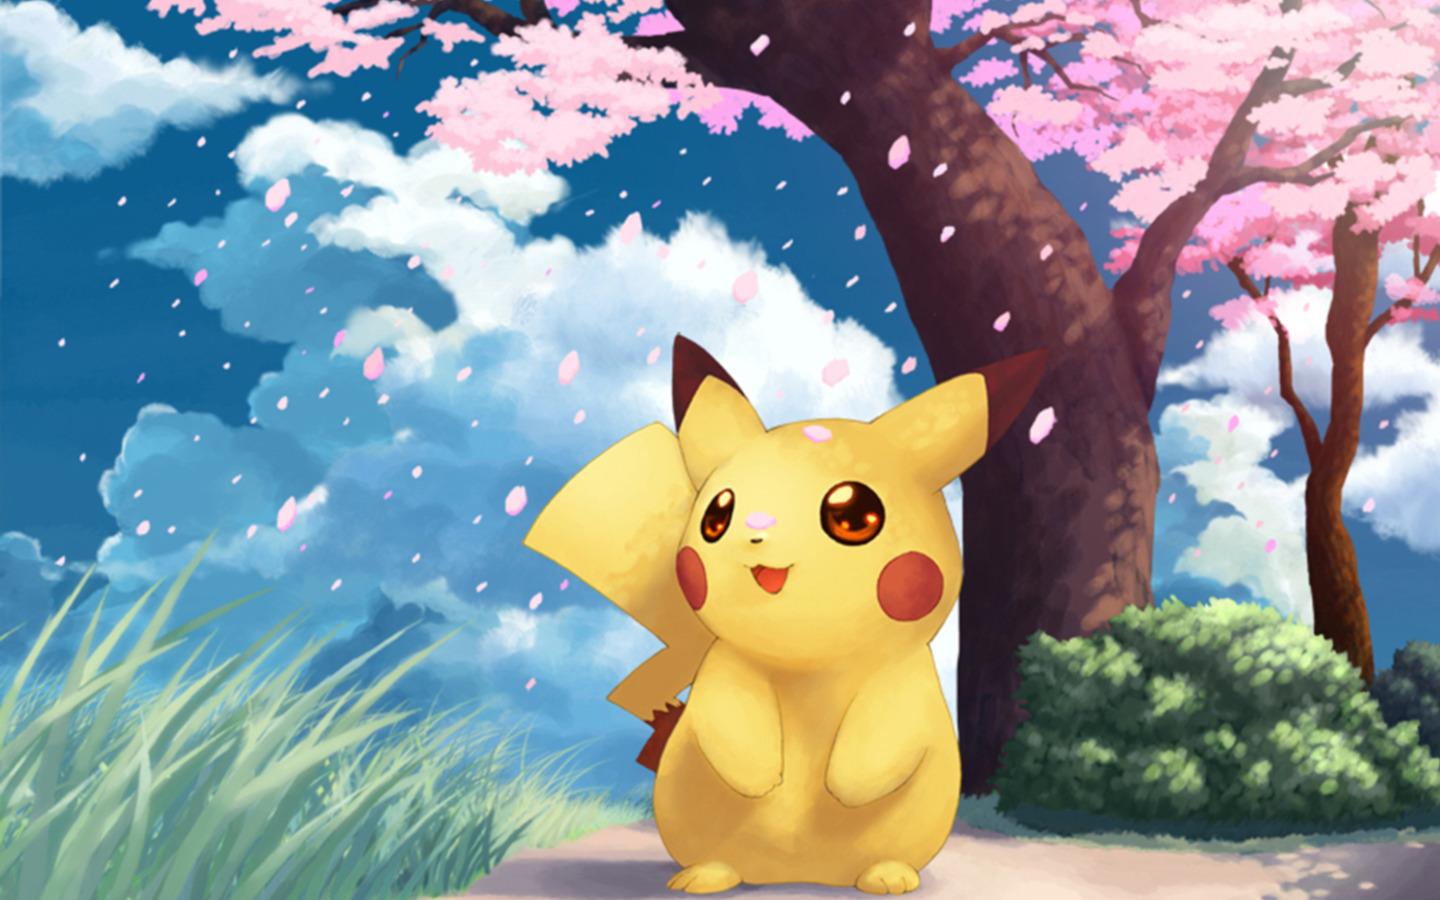 Cute Pikachu Wallpaper Image Amp Pictures Becuo